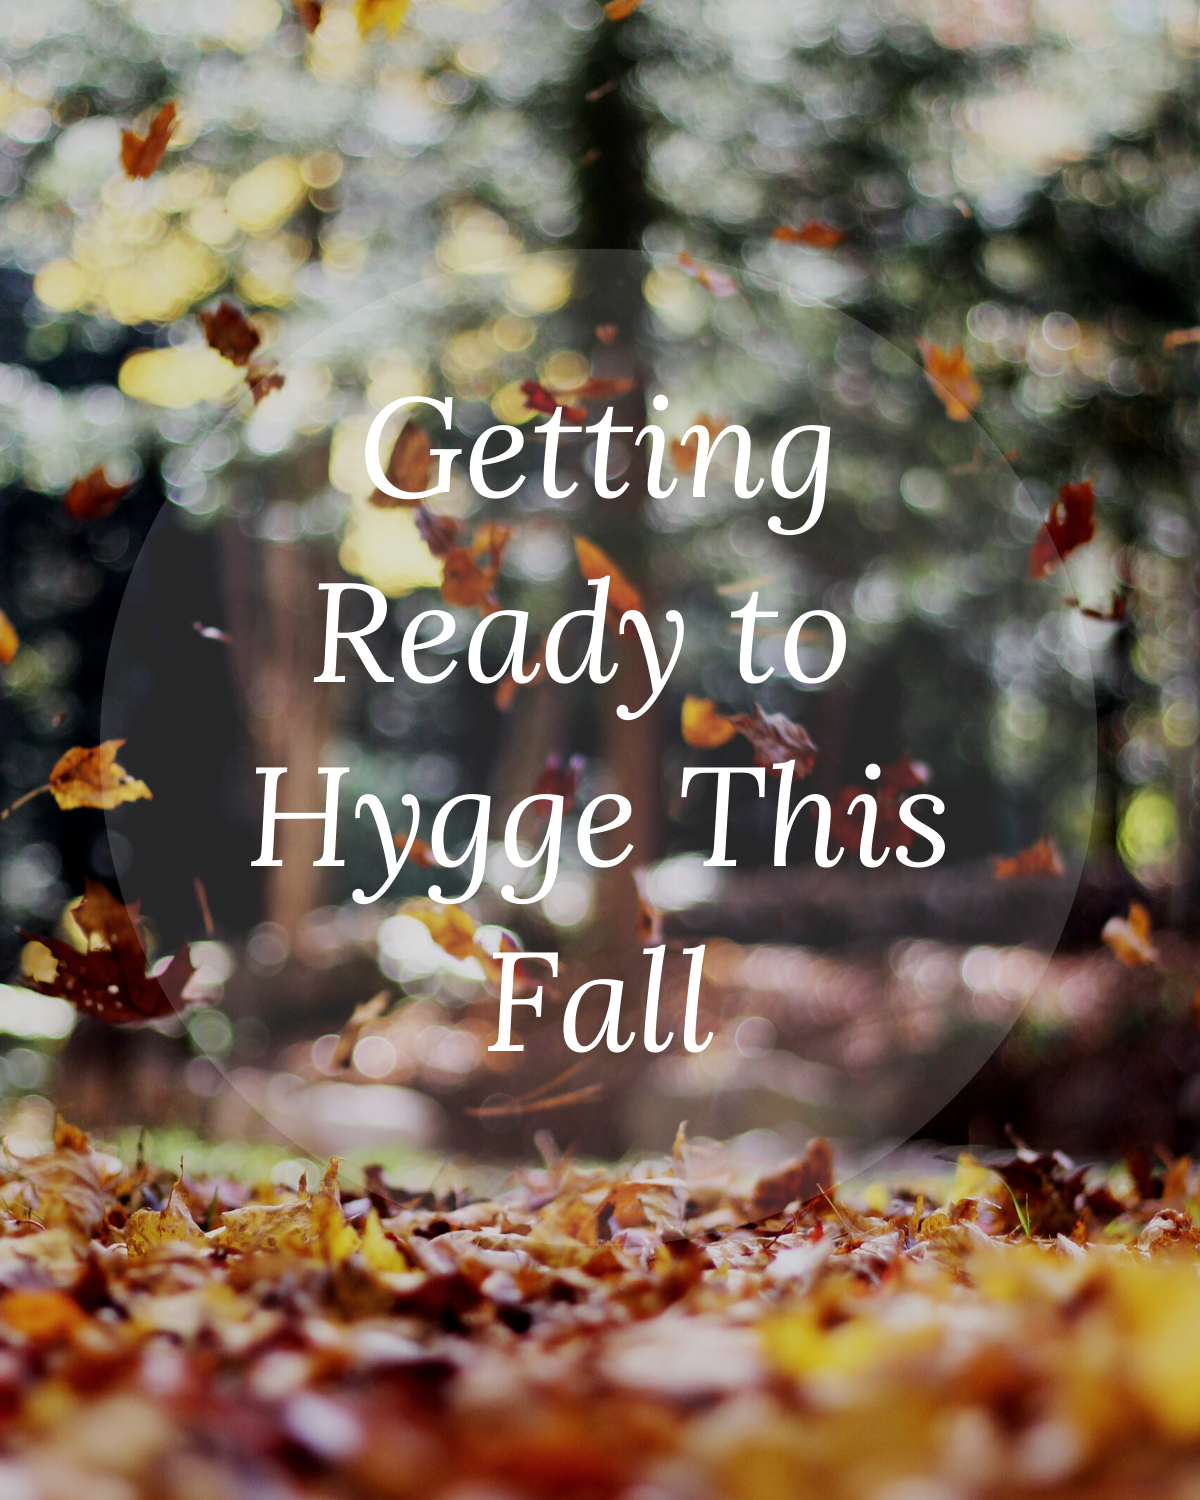 Getting Ready to Hygge This Fall